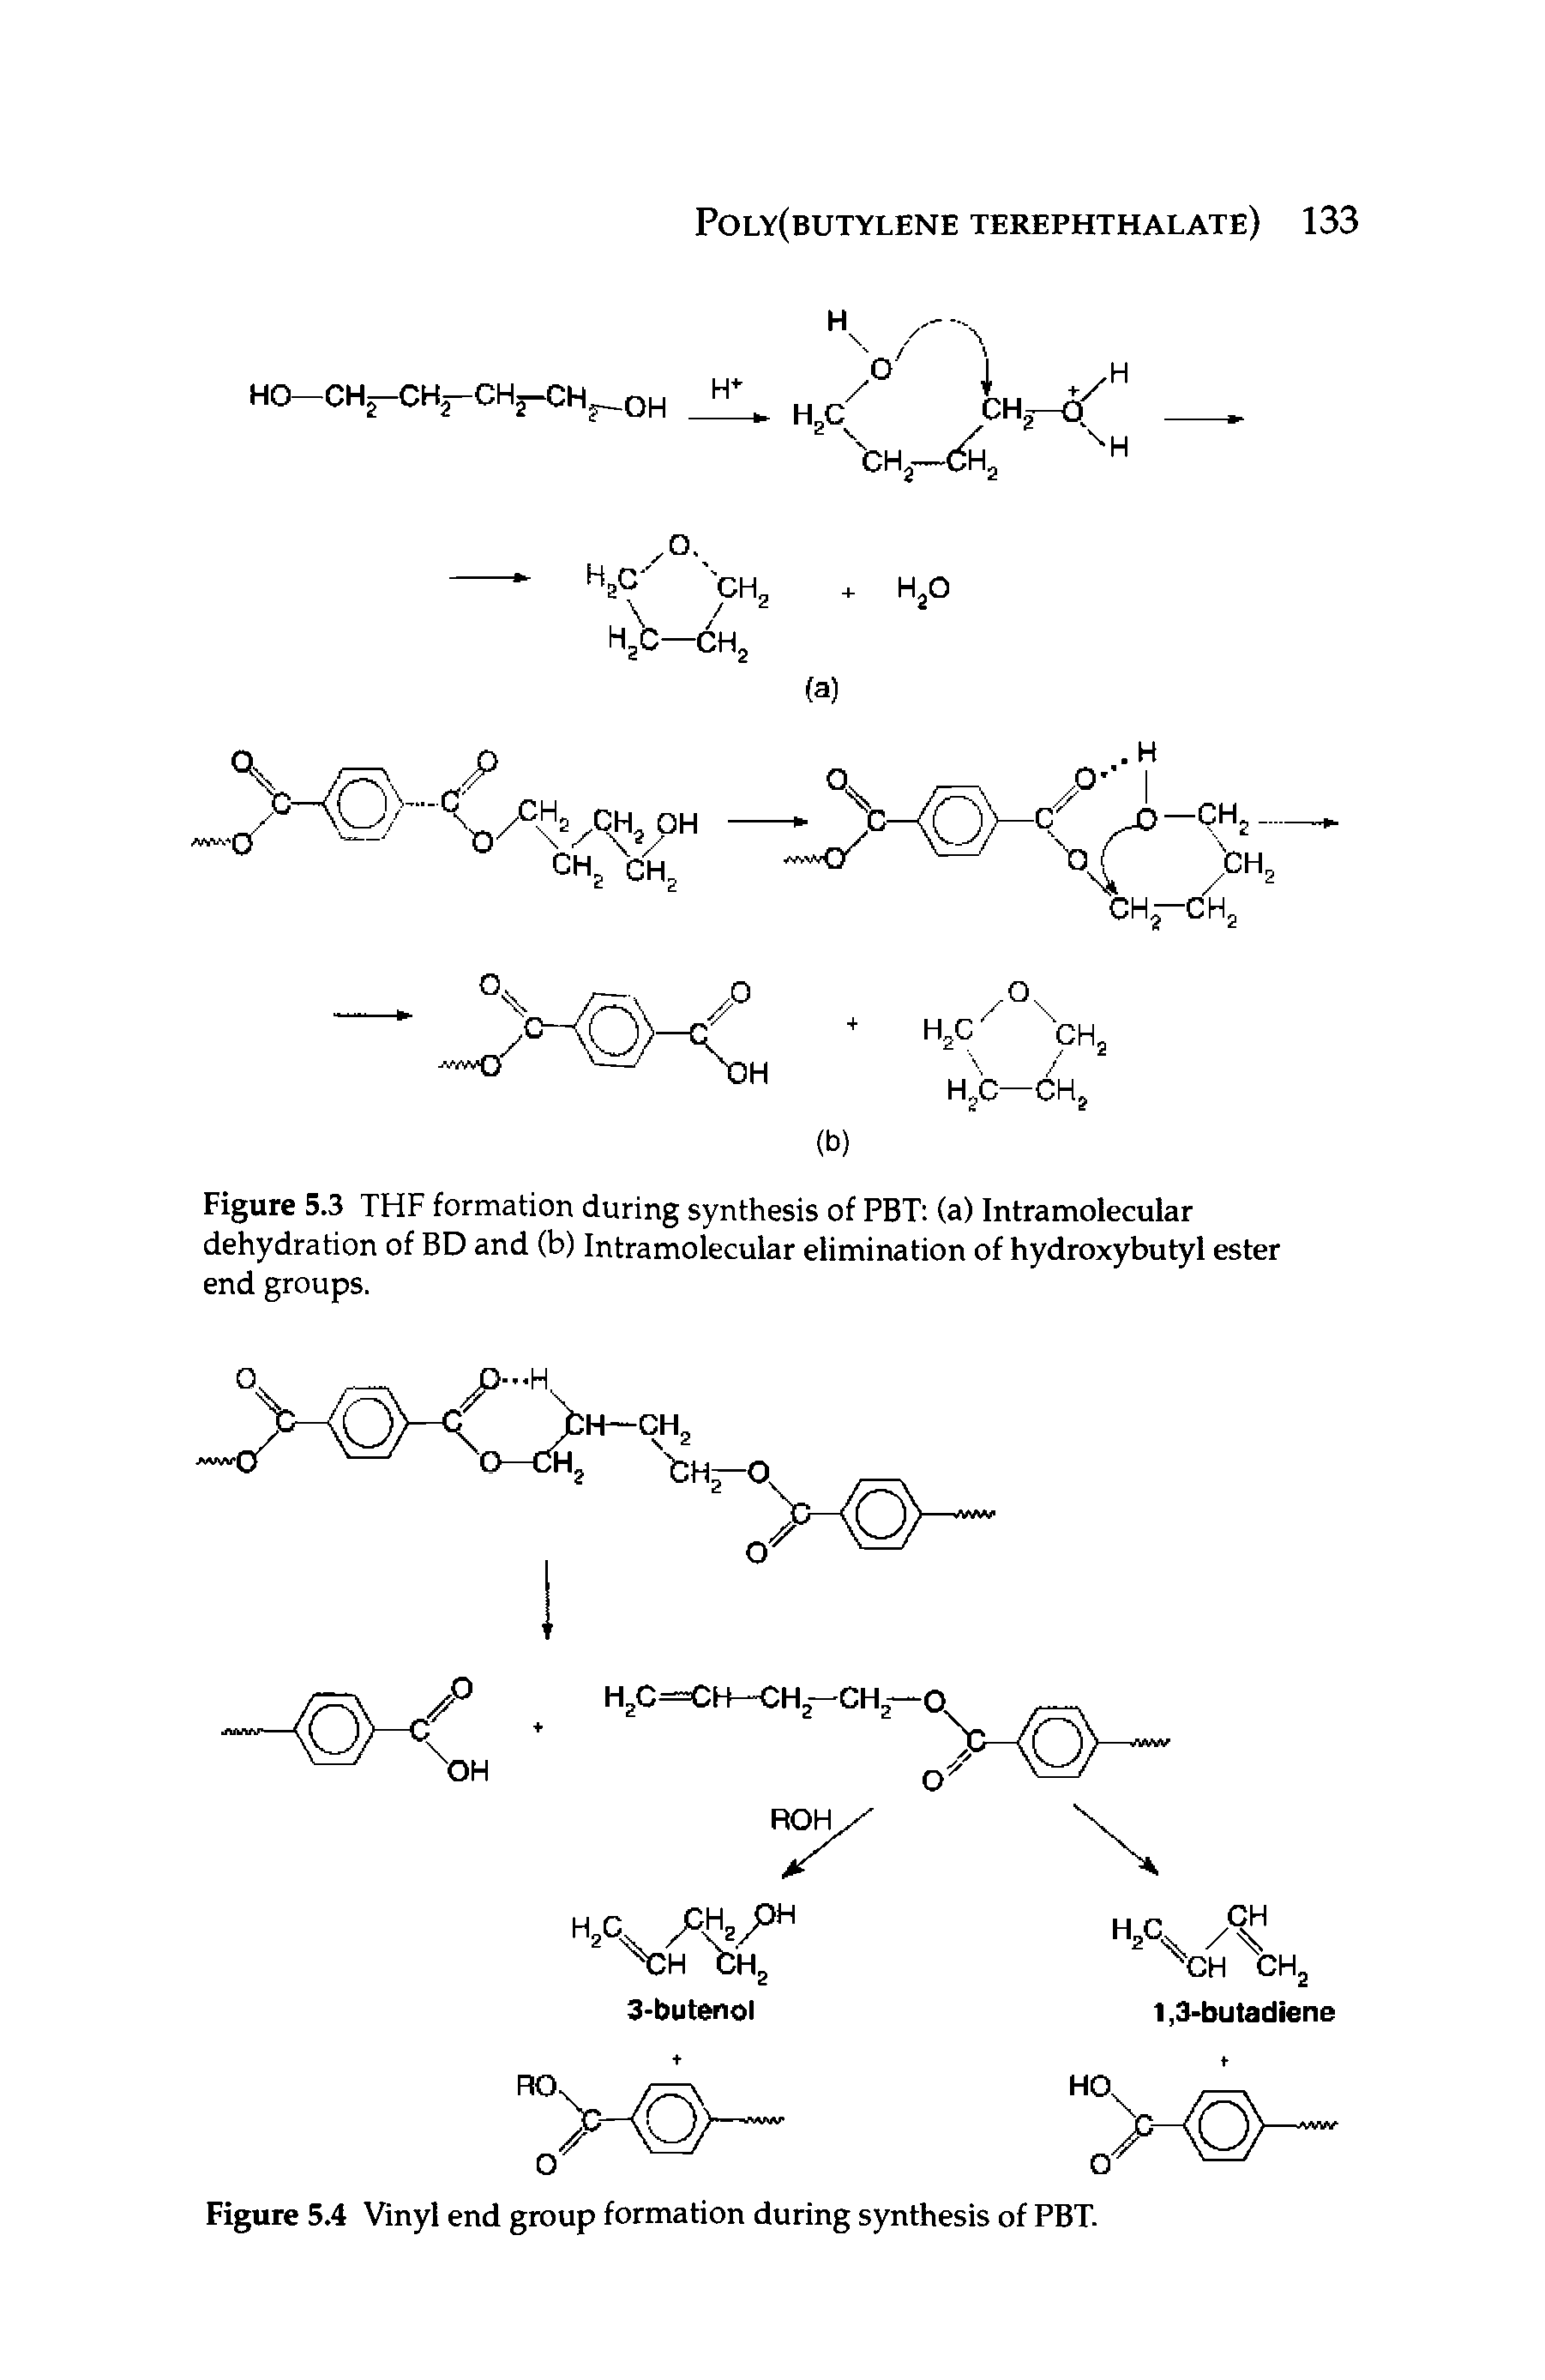 Figure 5.3 THF formation during synthesis of PBT (a) Intramolecular dehydration of BD and (b) Intramolecular elimination of hydroxybutyl ester end groups.